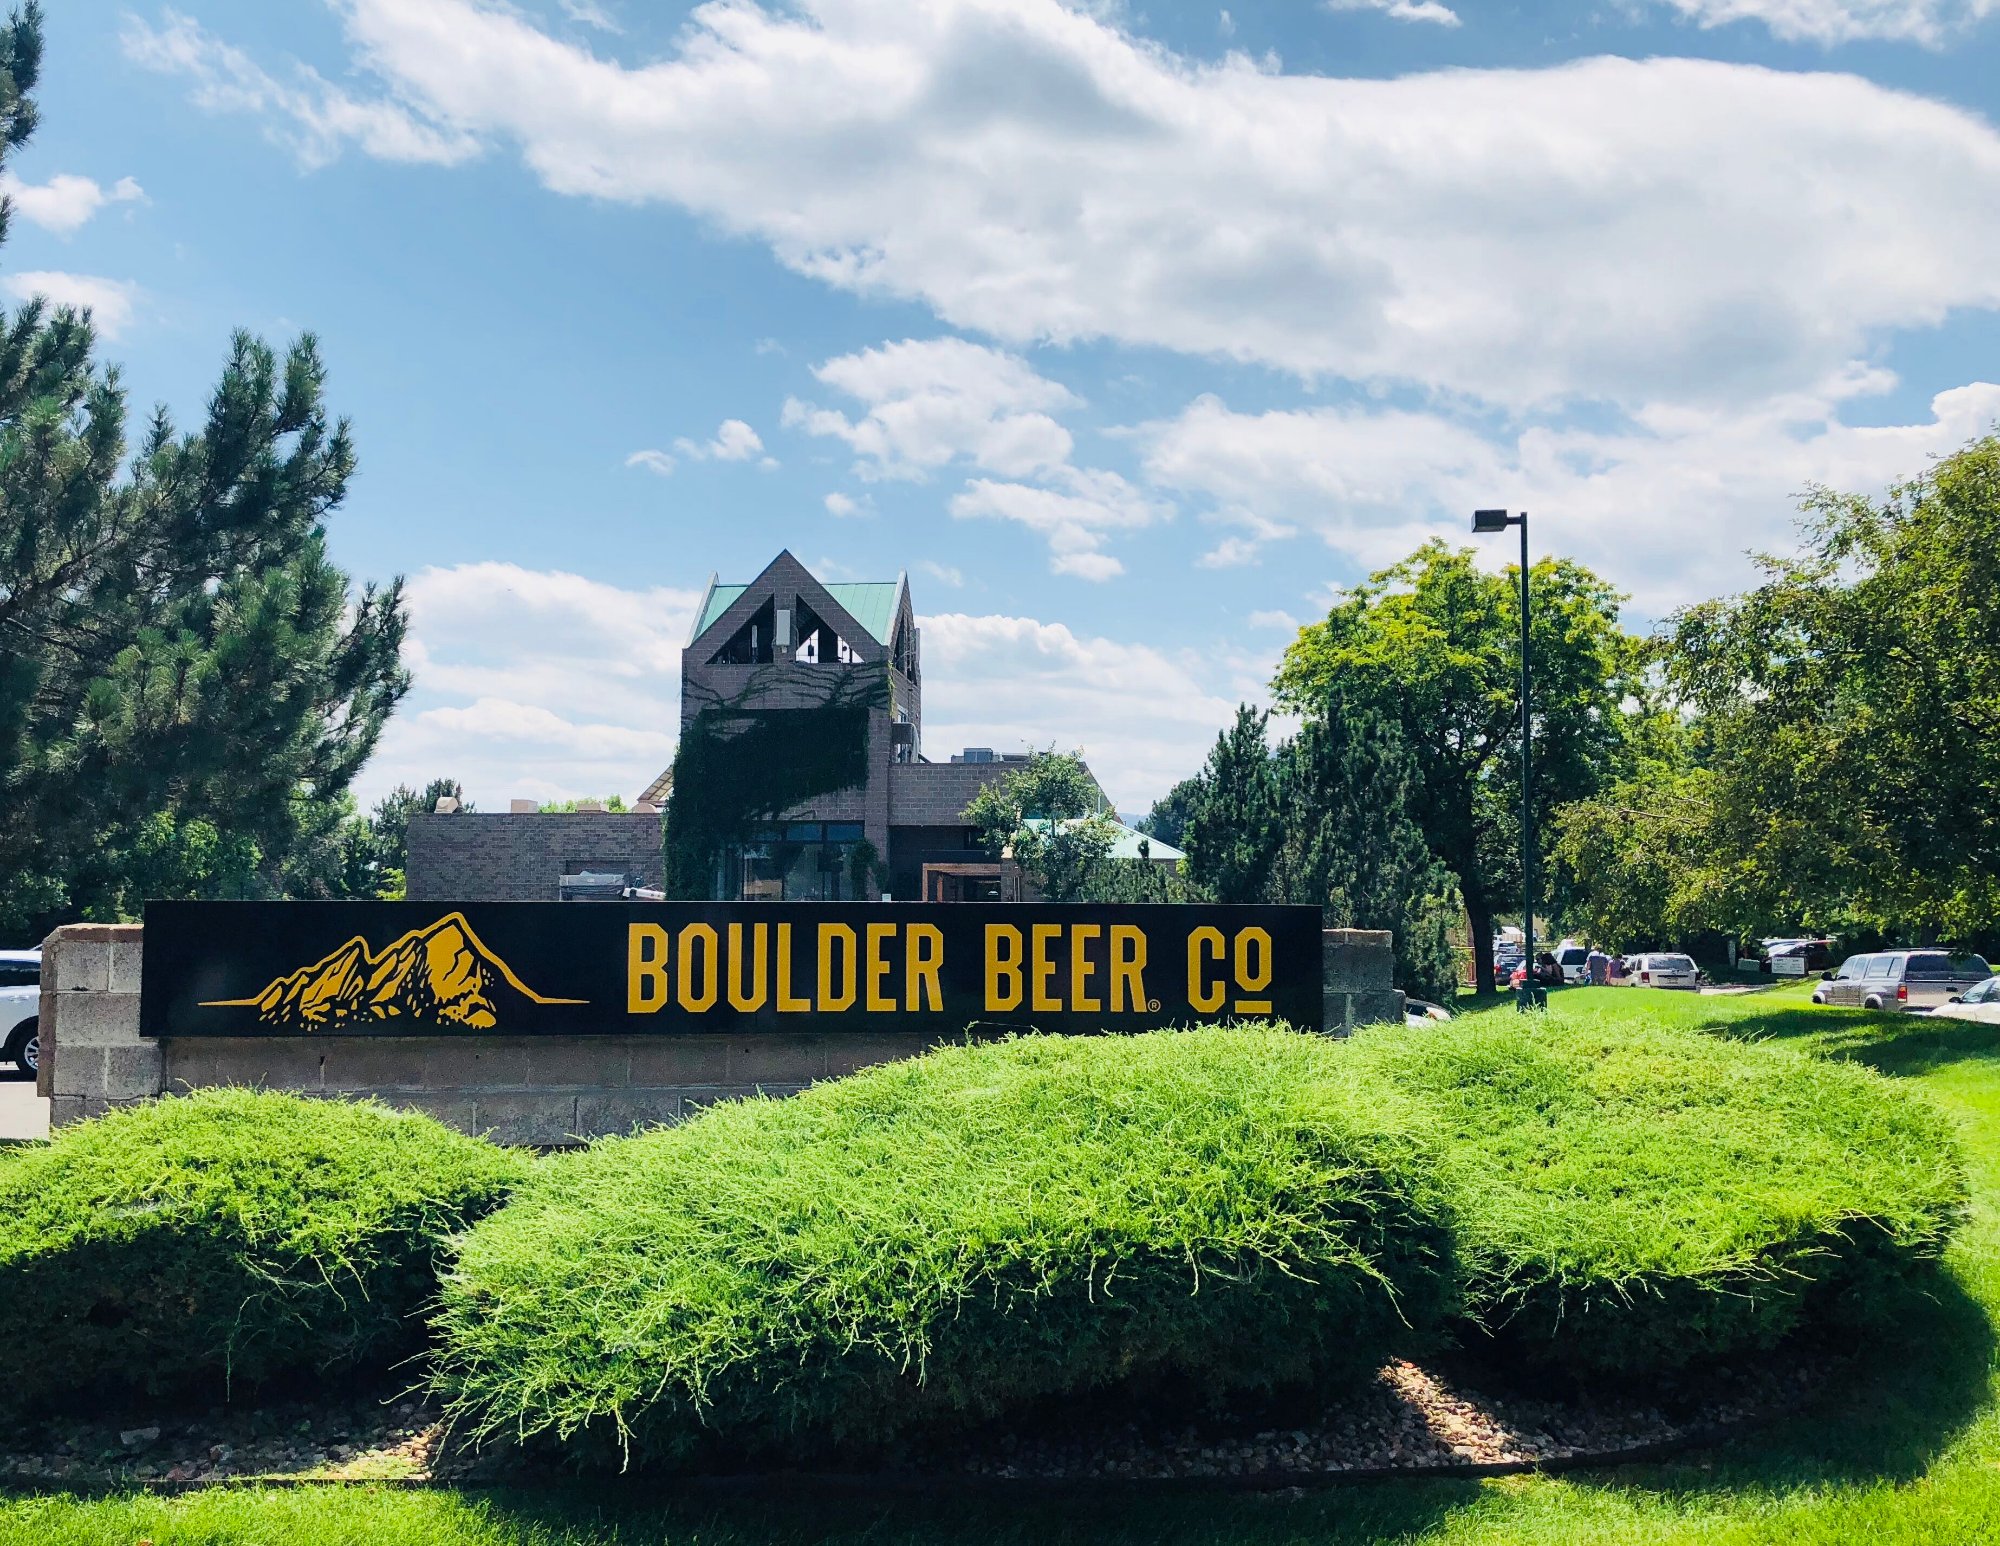 Boulder Beer Company Announces Sale and Closure of Brewpub